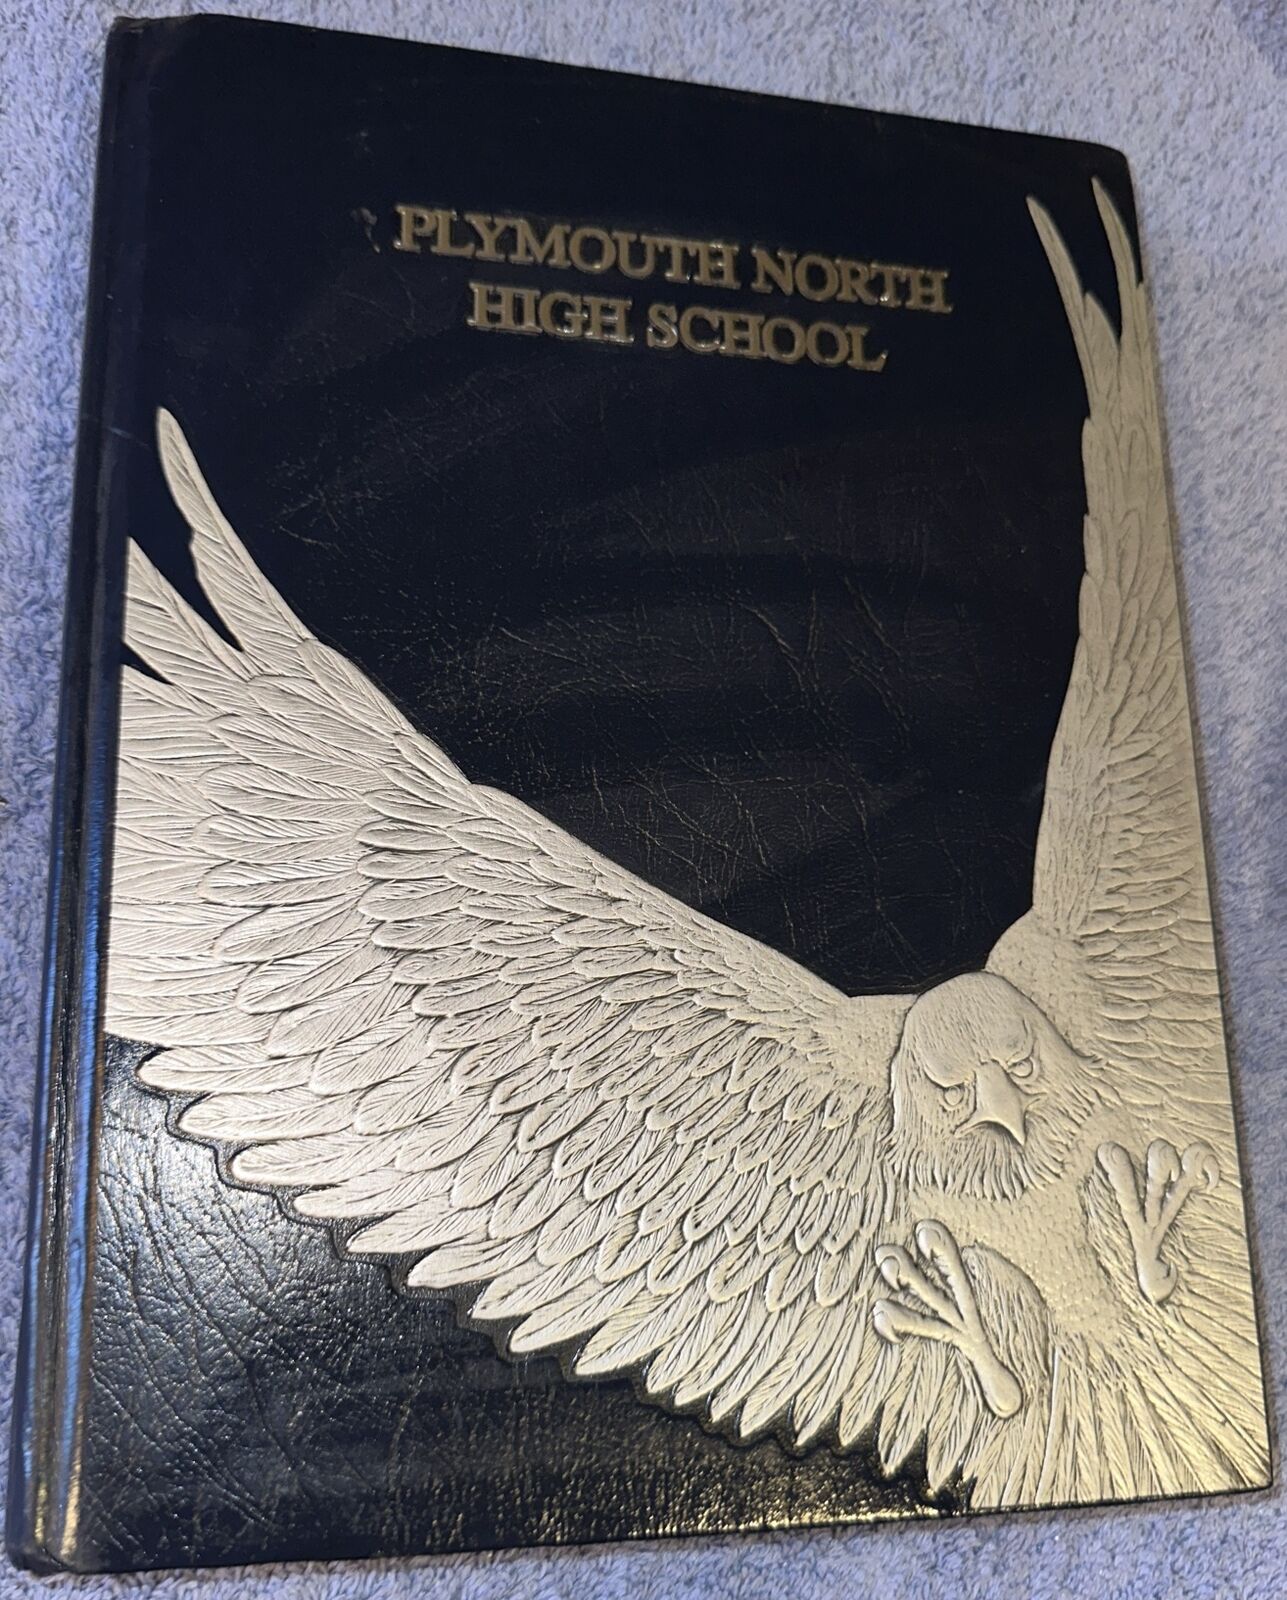 1998 Plymouth North High School Yearbook Plymouth Massachusetts 